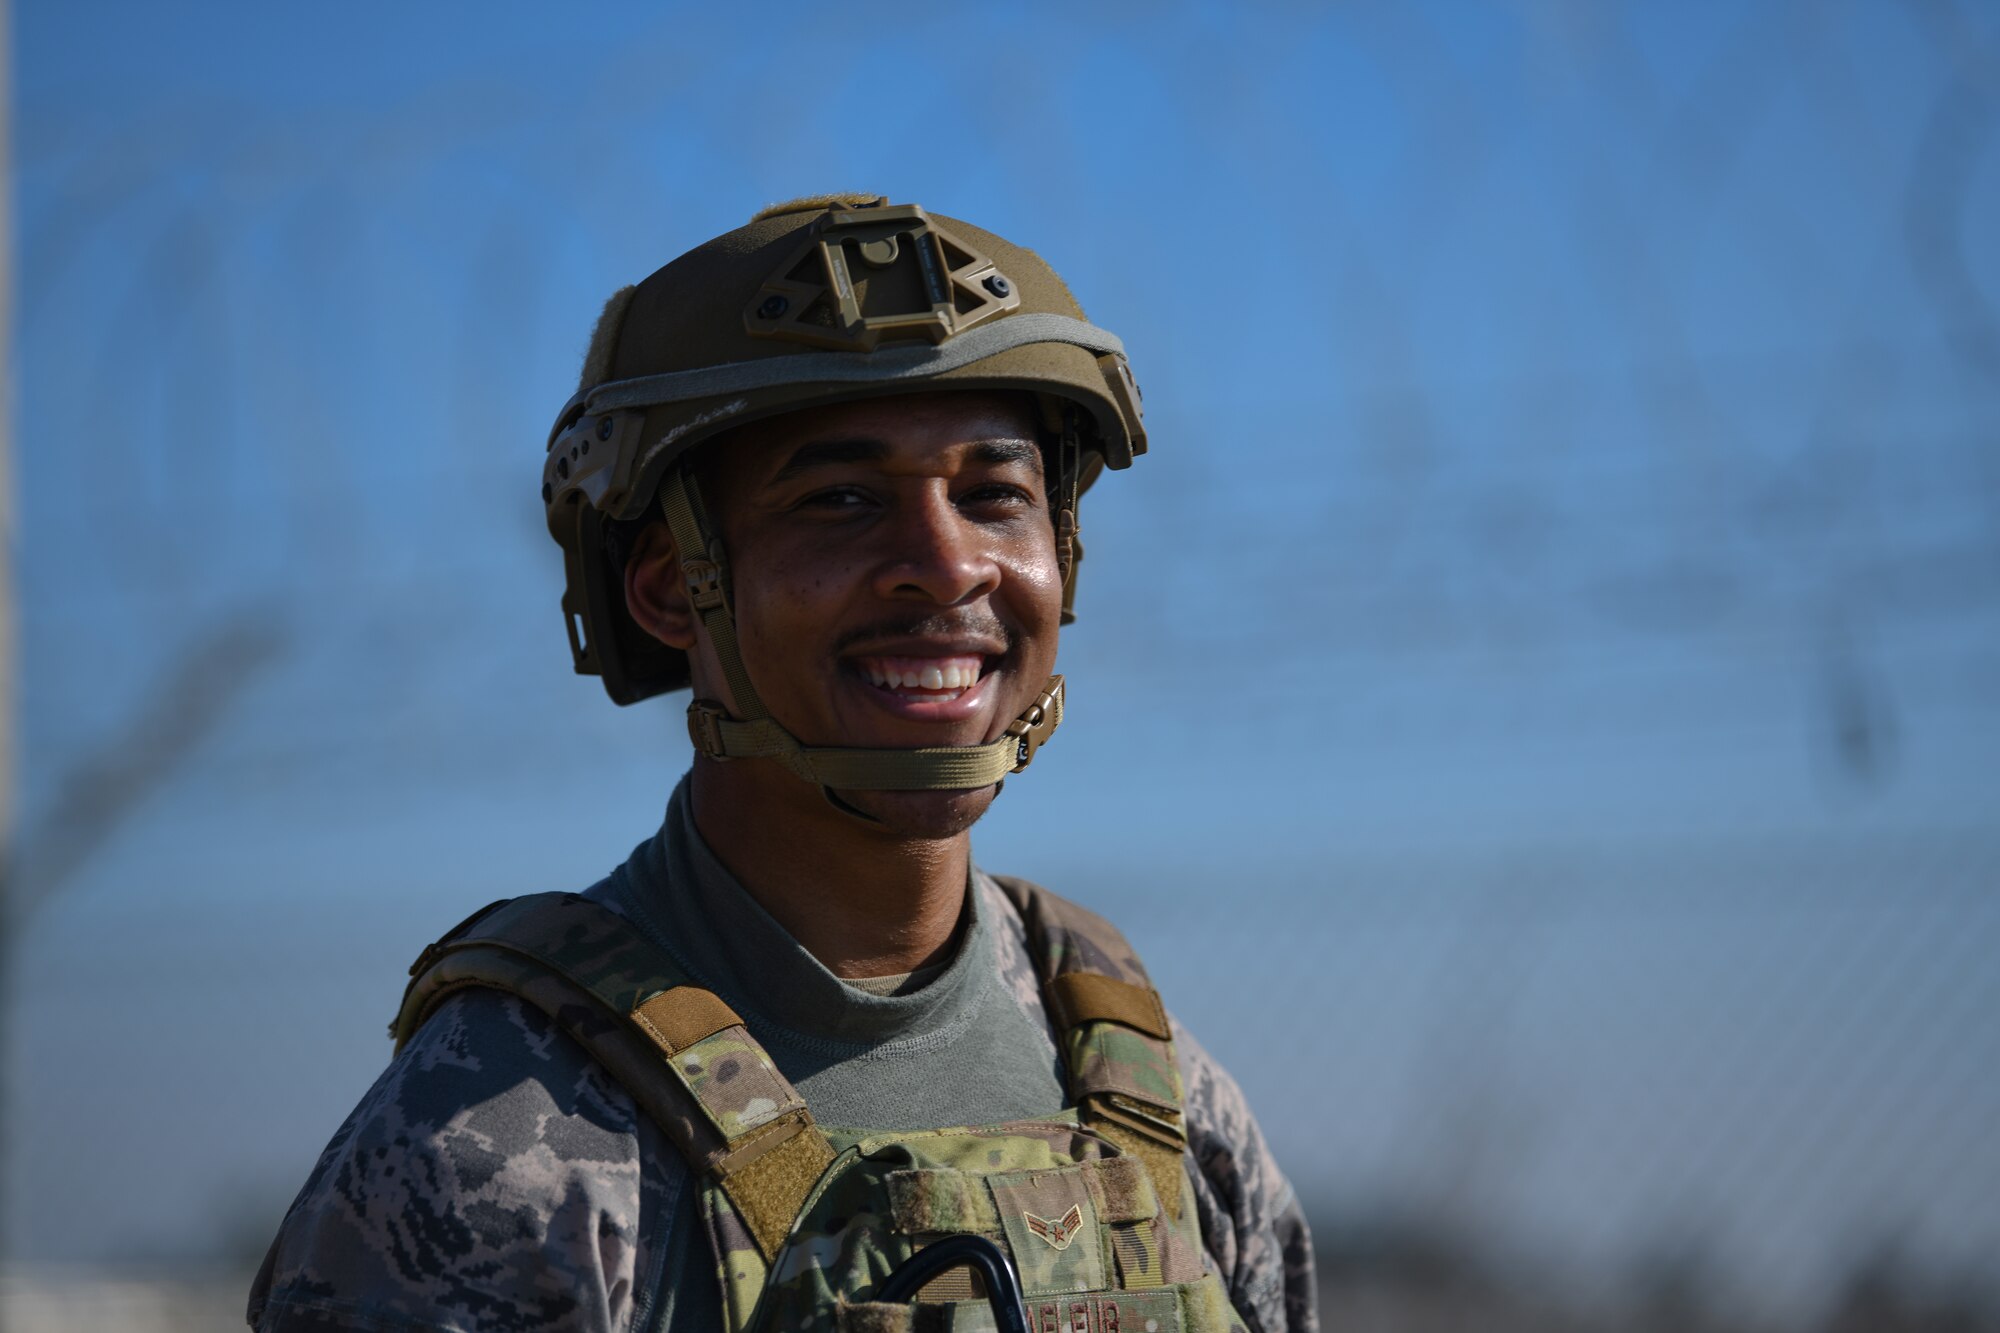 U.S. Air Force Airman 1st Class Marcus Lafleur, 31st Security Forces Squadron member, smiles at Aviano Air Base, Italy, Feb. 14, 2020. Twenty-one SFS members participated in 2020 Defenders Challenge which demonstrated endurance, strength, resiliency and tenacity. (U.S. Air Force photo by Airman 1st Class Ericka A. Woolever)